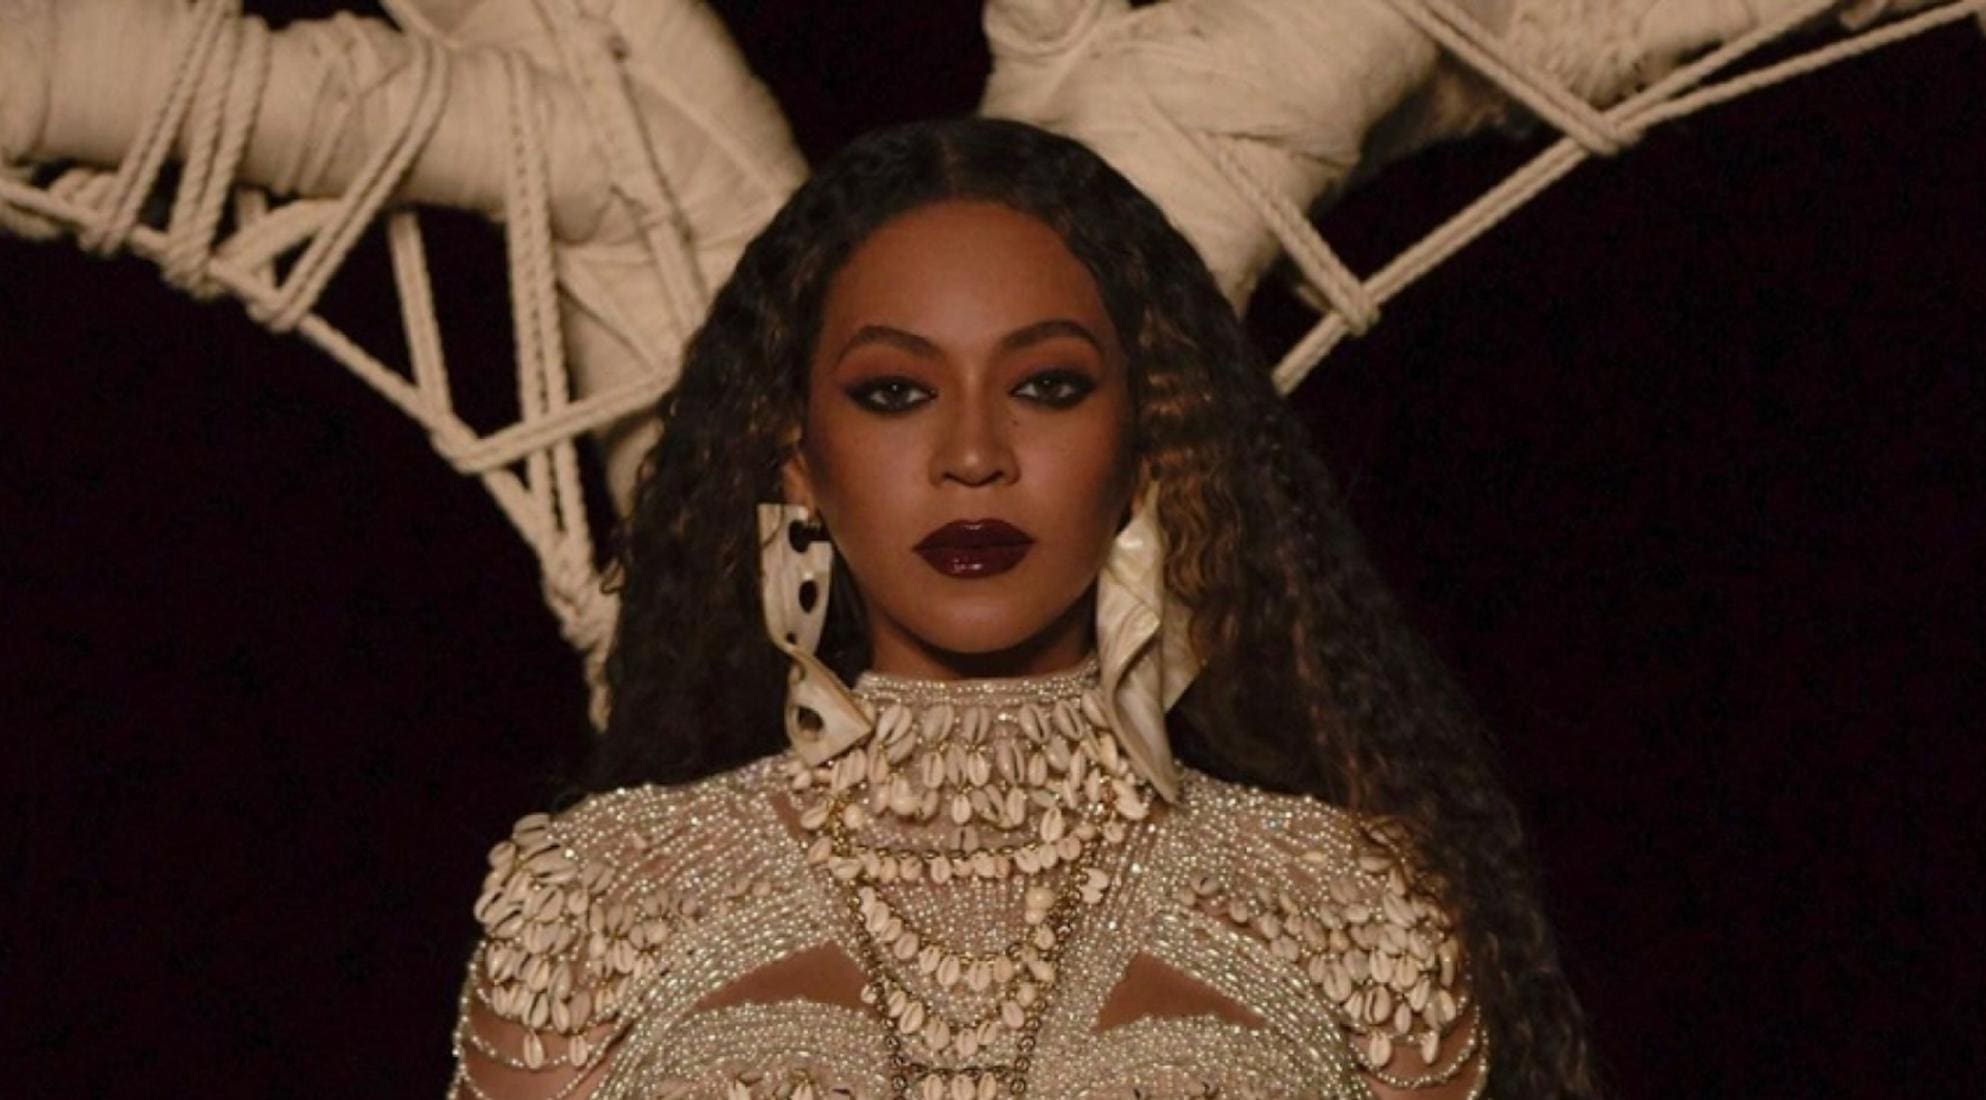 Beyonce Offers Her Gratitude To Everyone Working To Fight The Coronavirus Pandemic